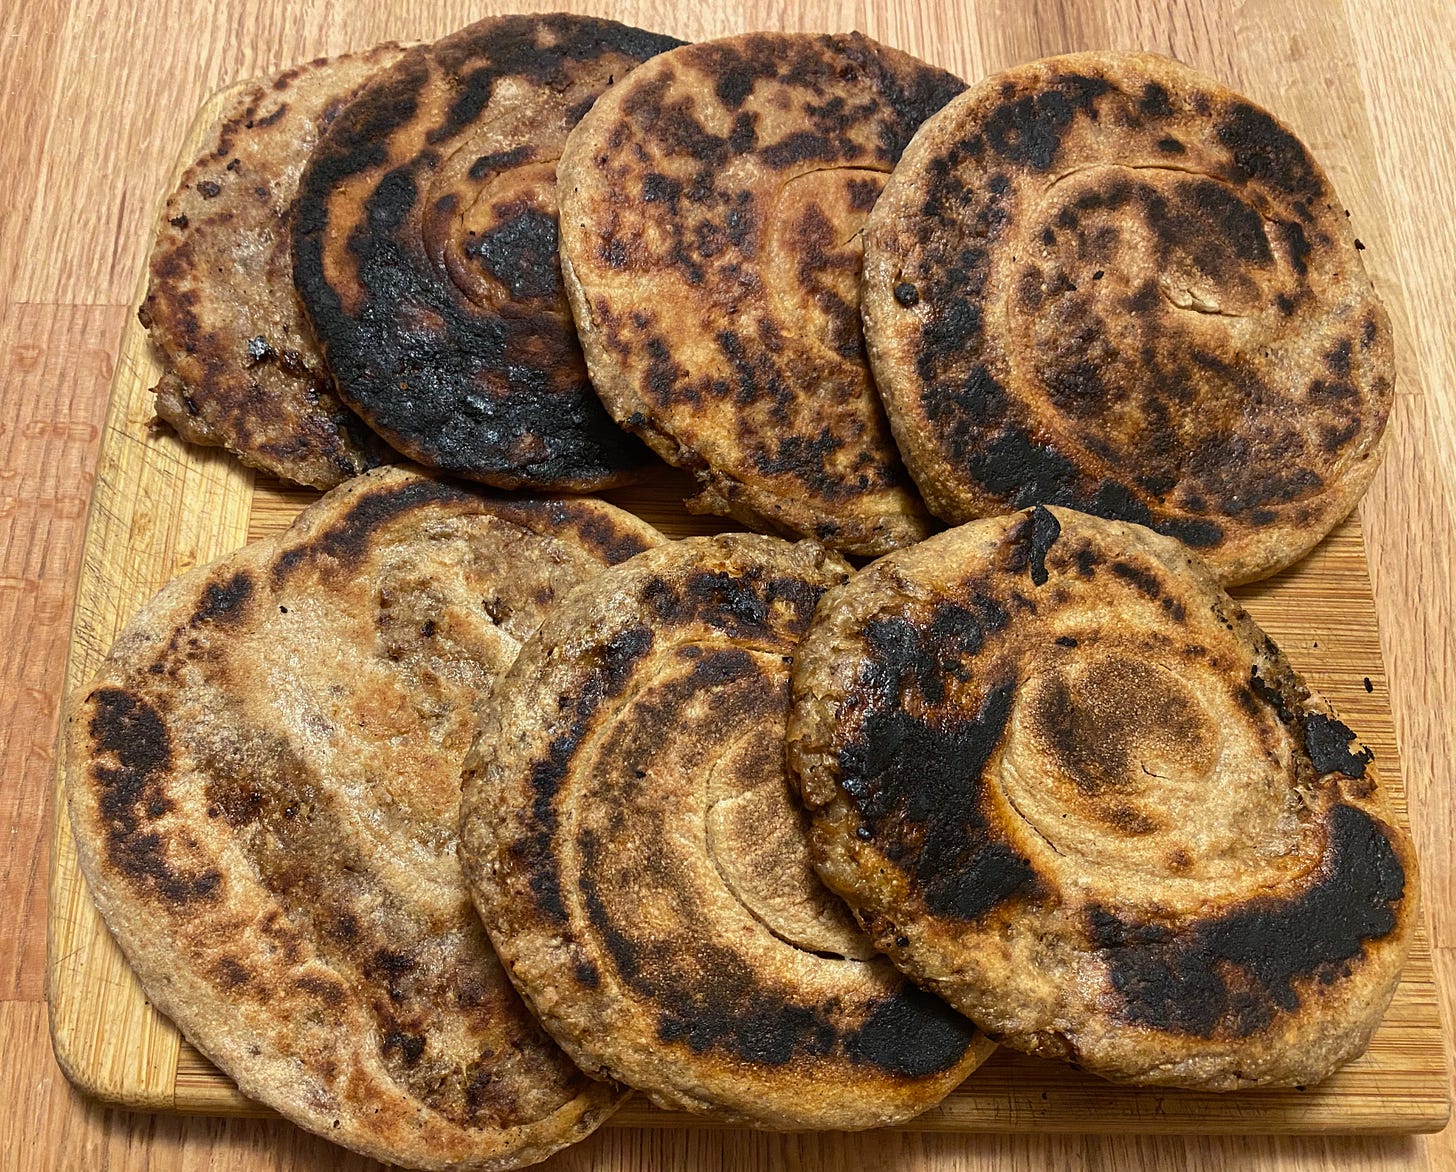 Eight round, charred flatbreads sit in two rows on a cutting board.